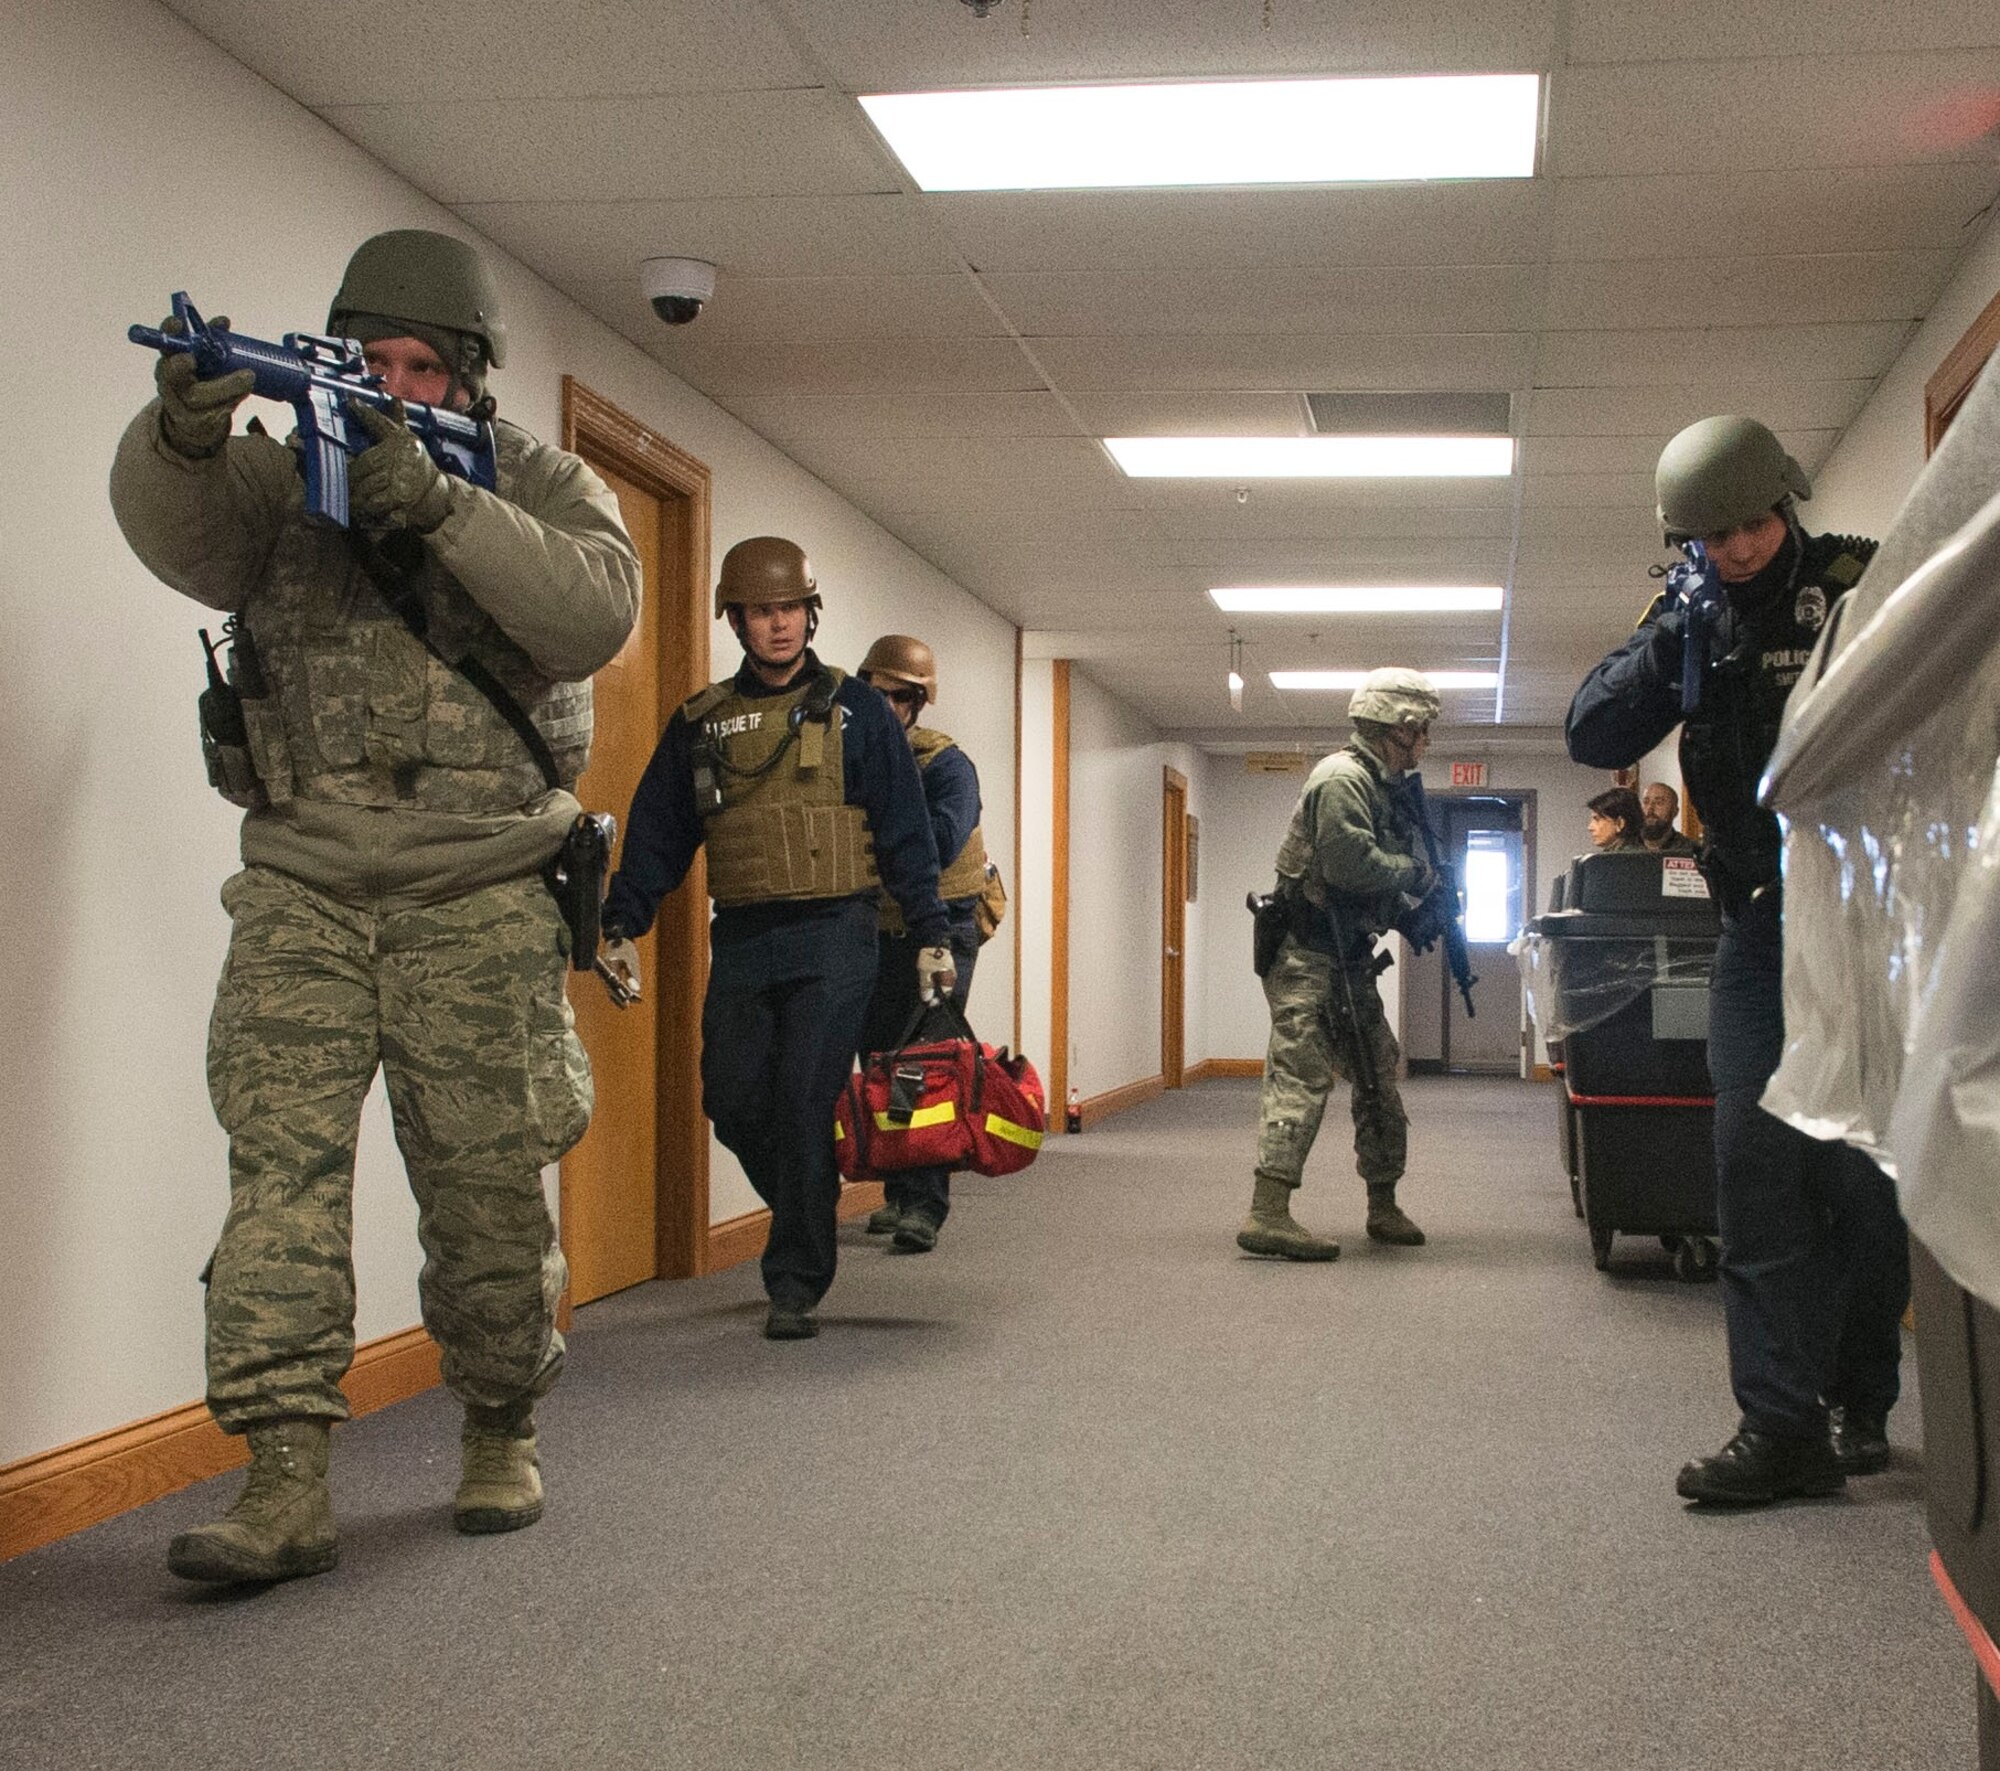 Active shooter response is the focus of a base-wide exercise Wednesday. Wright-Patterson AFB defenders and emergency response personnel enter a base facility during a February 2015 active-shooter exercise.